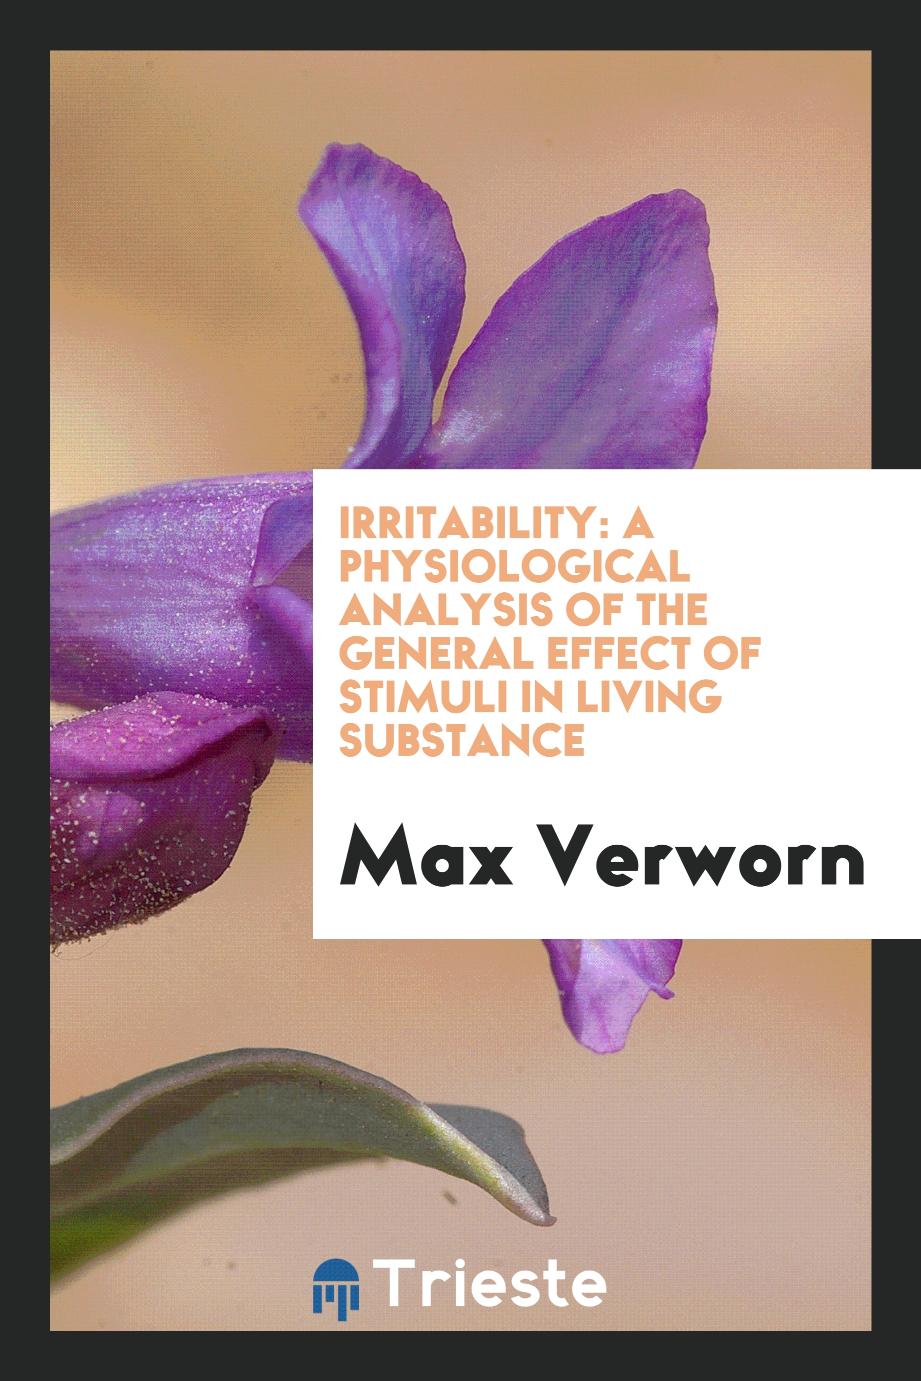 Irritability: A Physiological Analysis of the General Effect of Stimuli in Living Substance